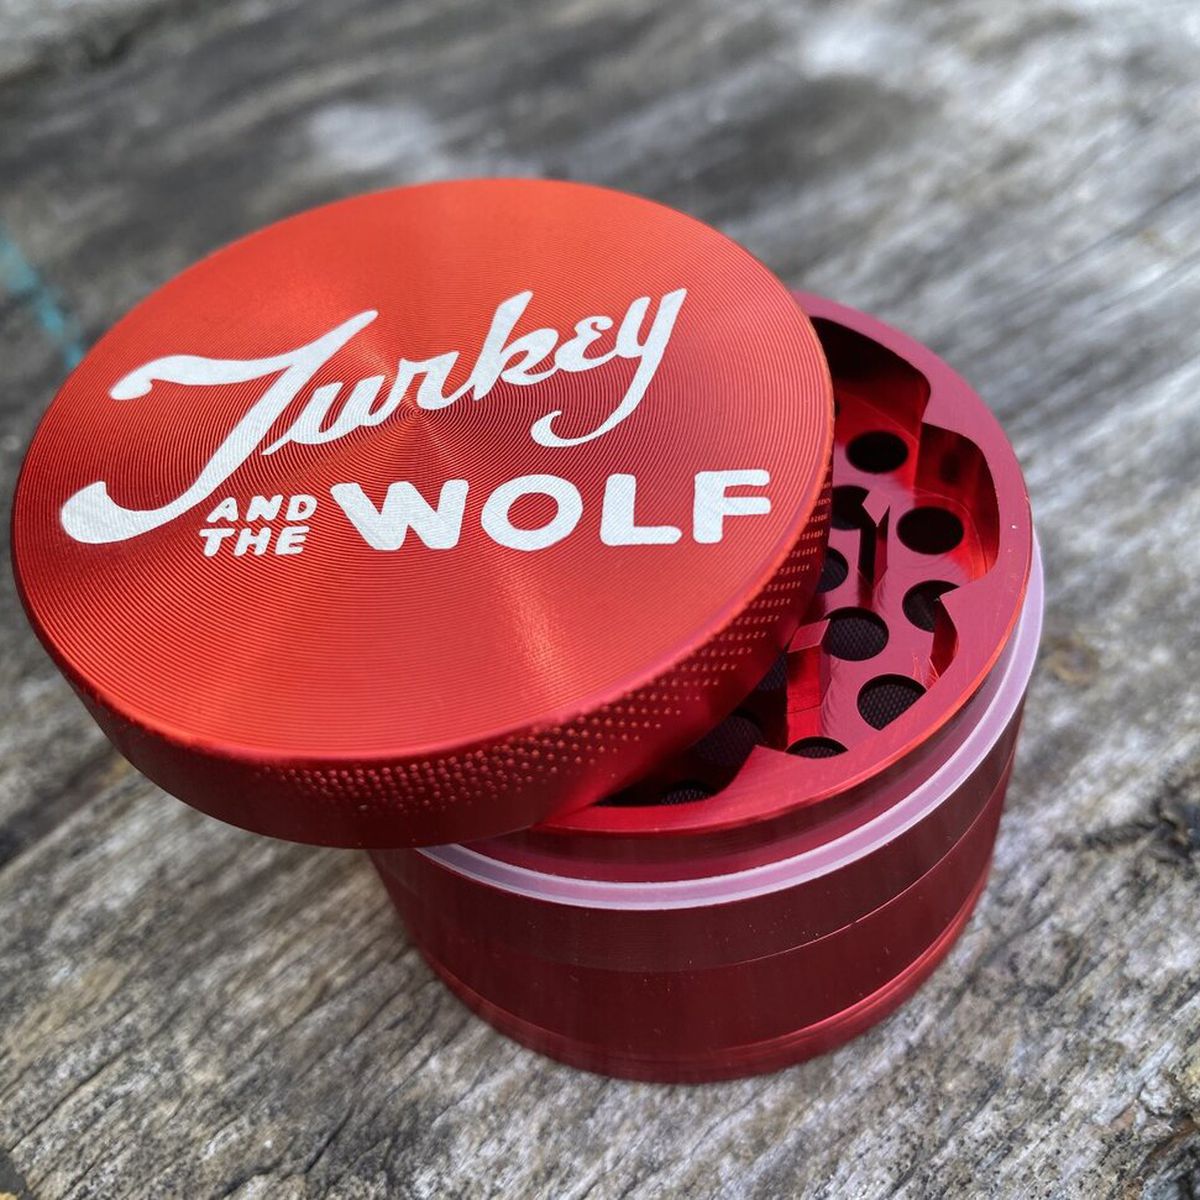 A red herb grinder with a Turkey and the Wolf logo